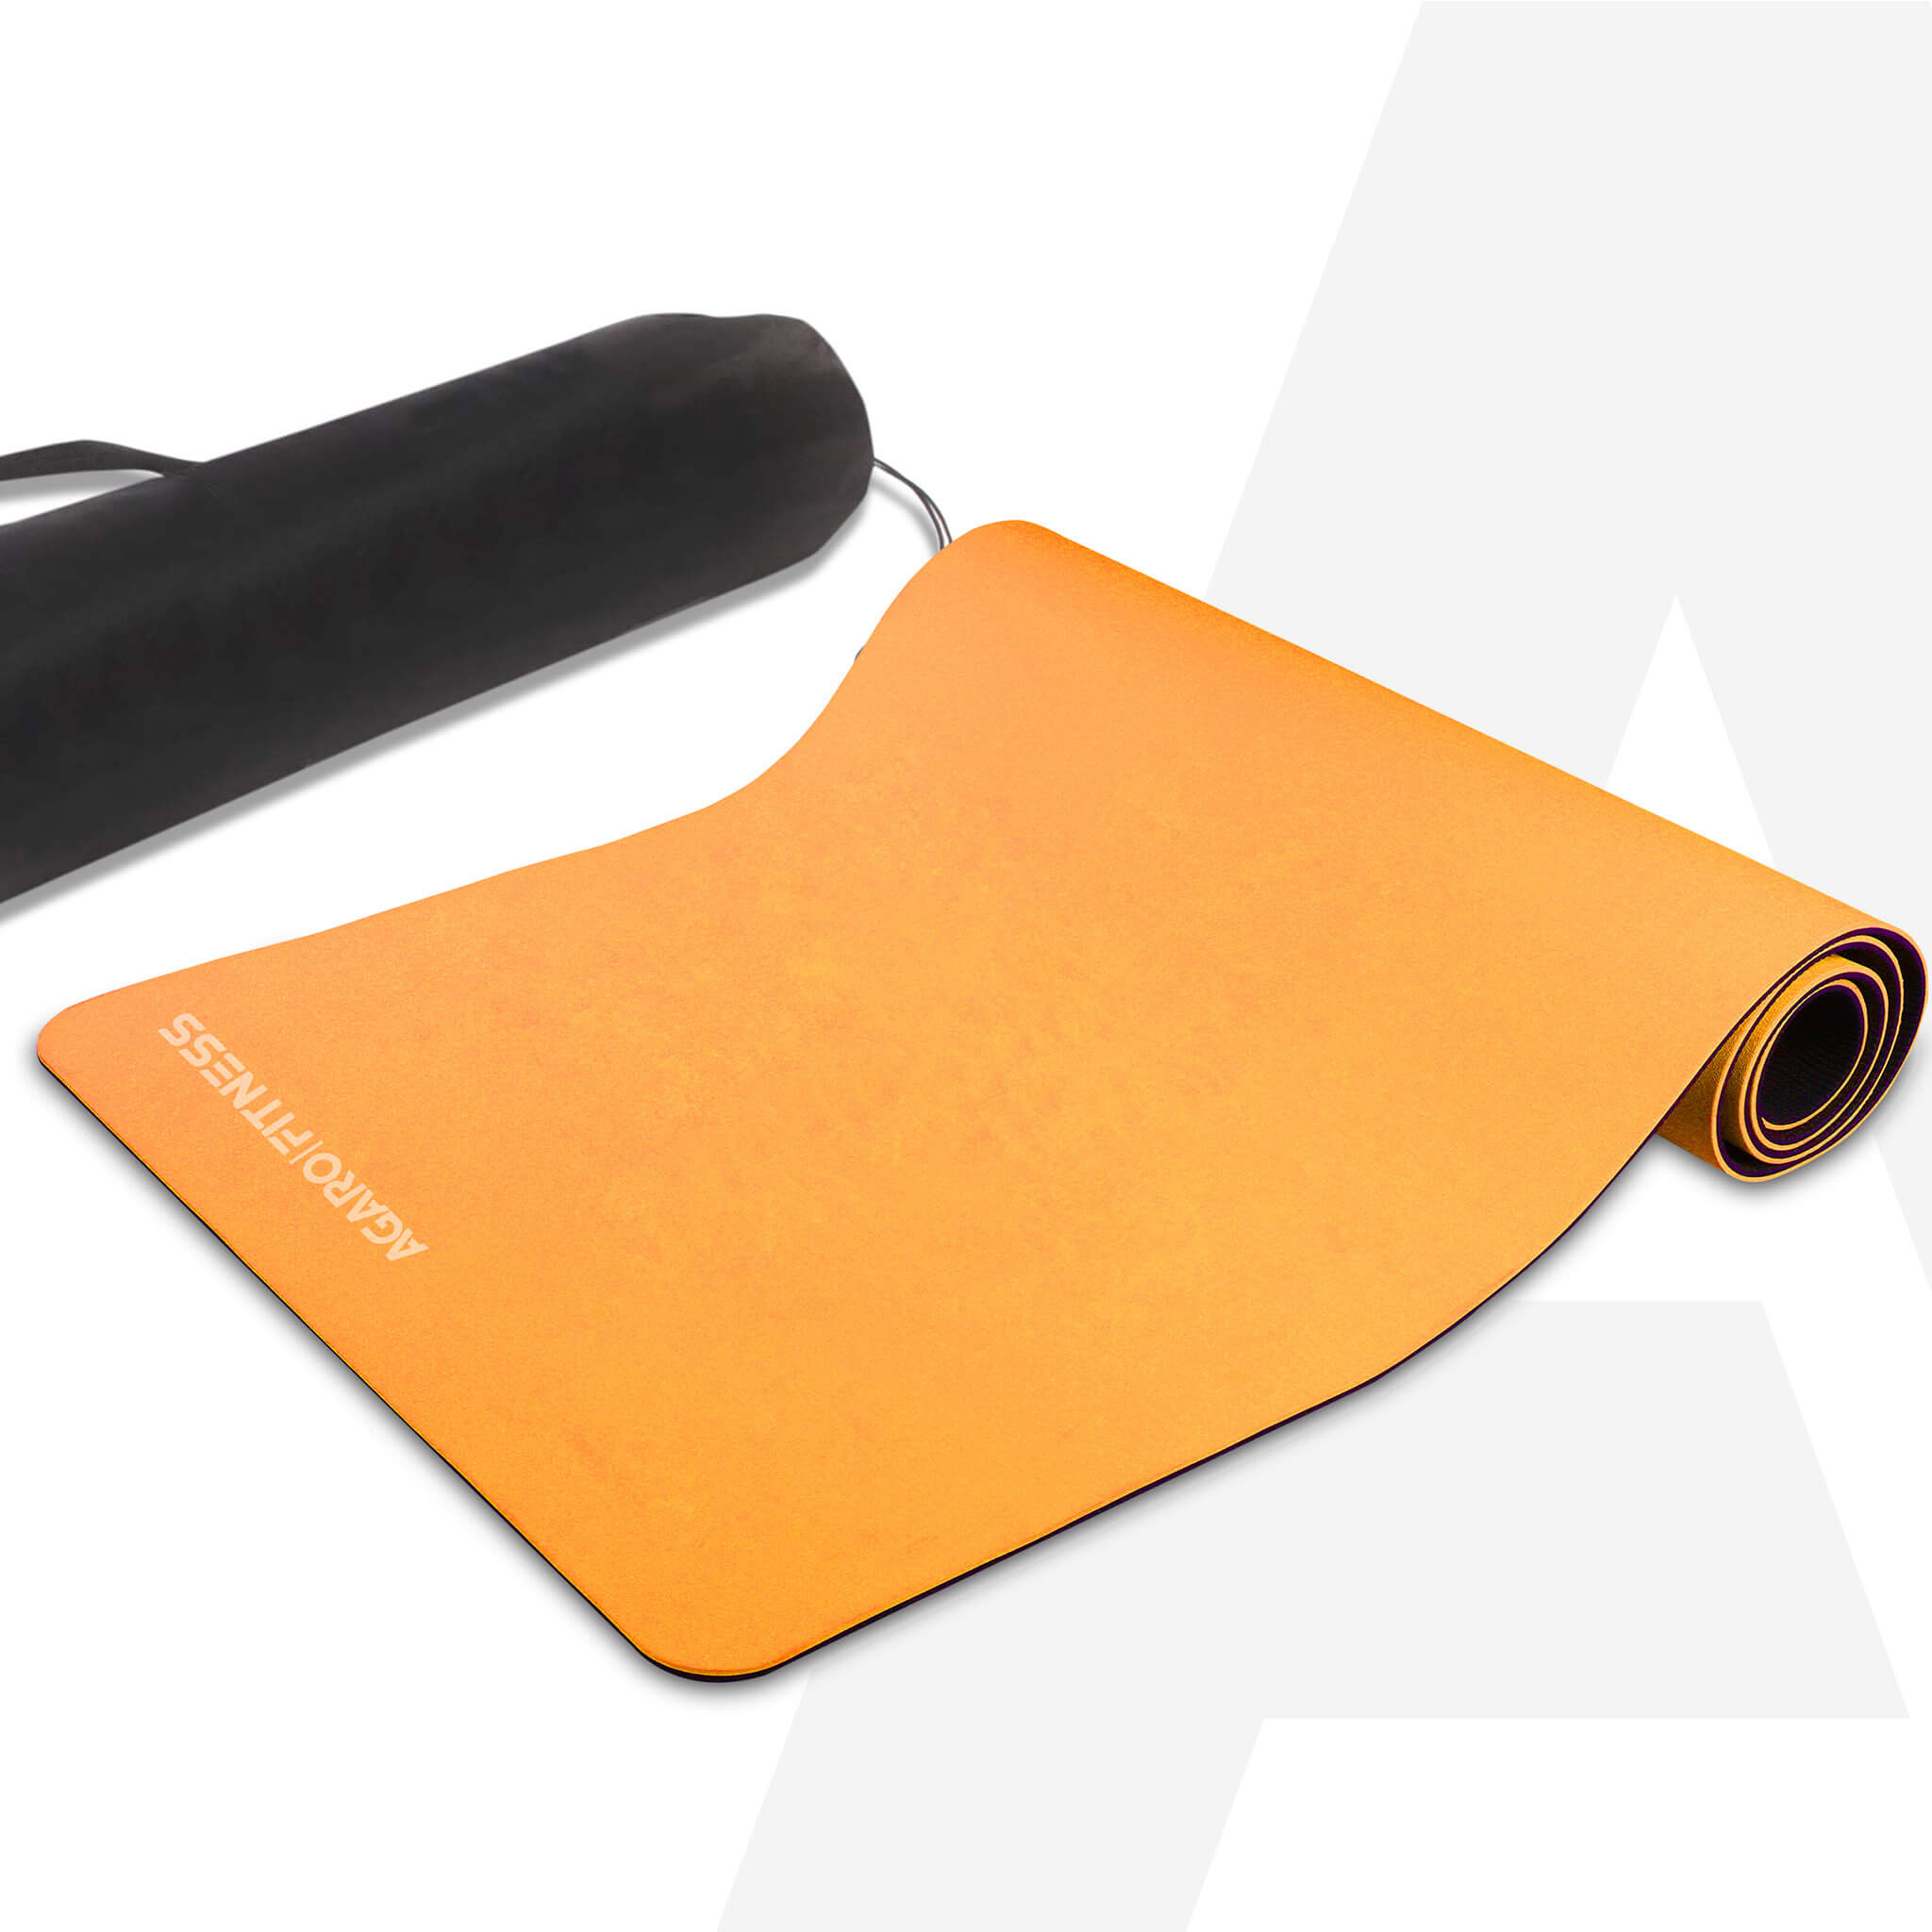 Gaiam Essentials Thick Yoga Mat Fitness & Exercise Mat with Easy-Cinch Yoga  Mat Carrier Strap, Orange, 72 InchL x 24 InchW x 2/5 Inch Thick 